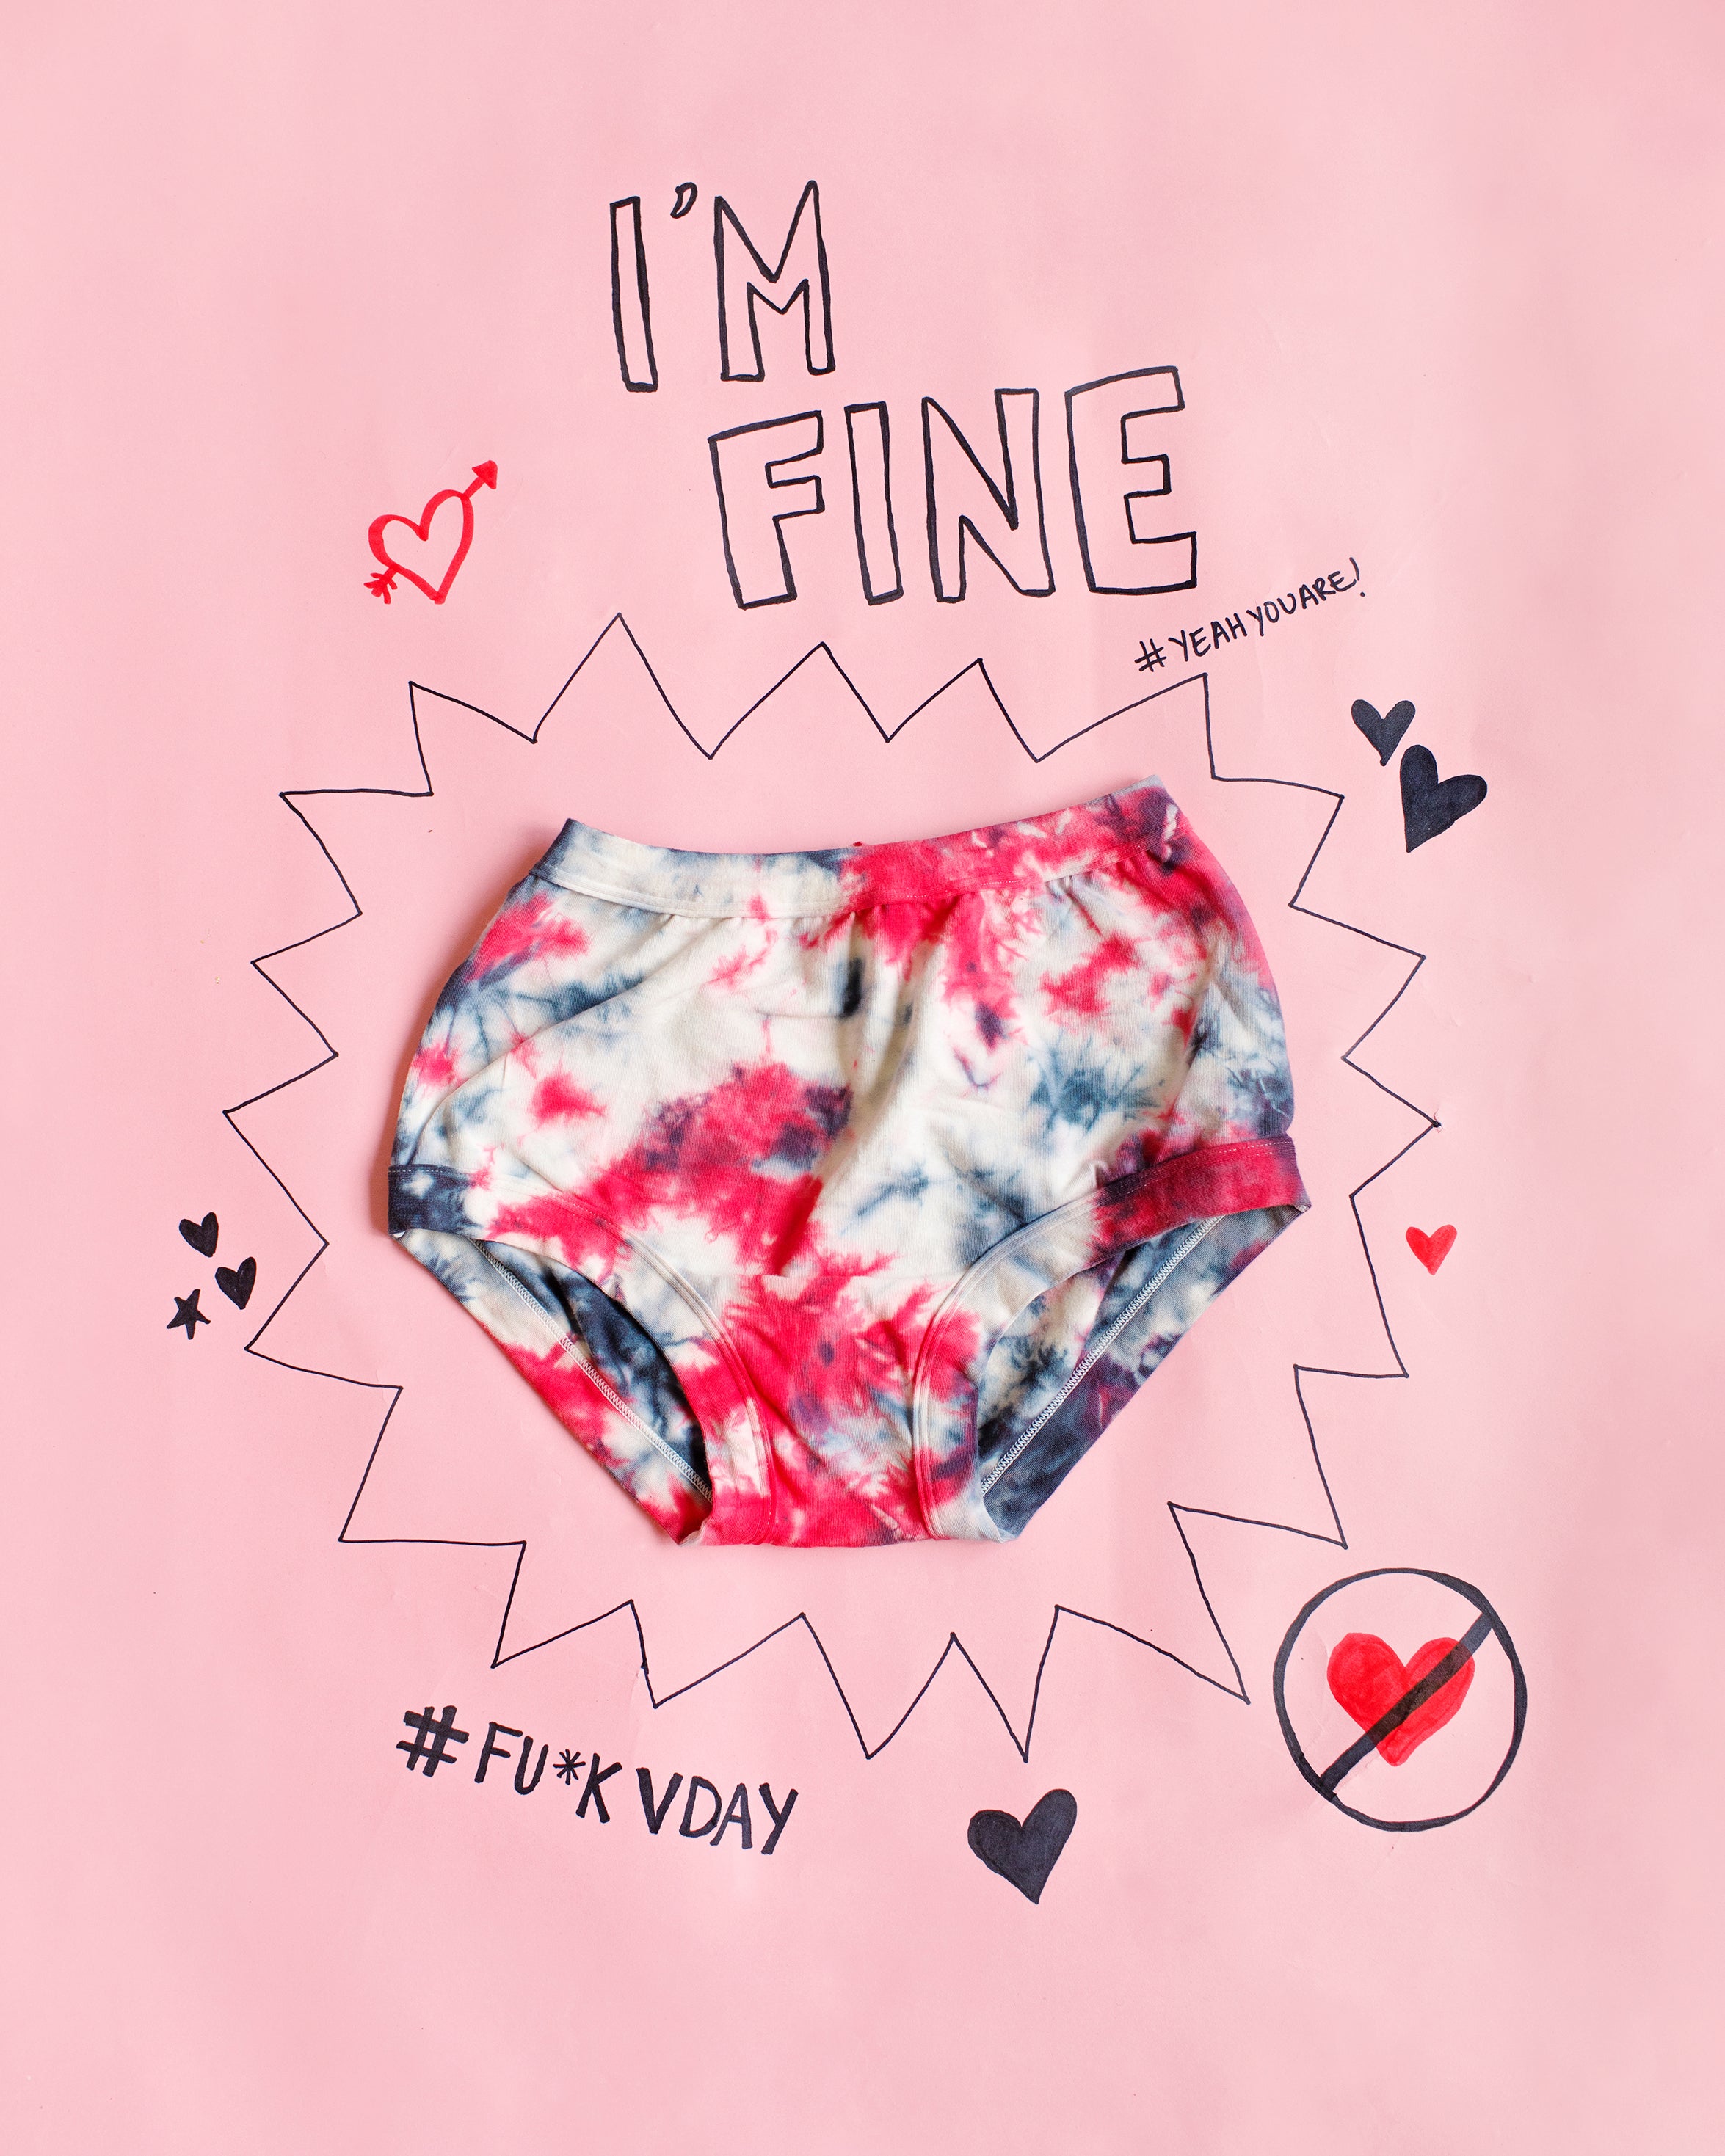 Flat lay of Thunderpants Original style underwear in black, red, and white scrunch dye on a pink background with writing.